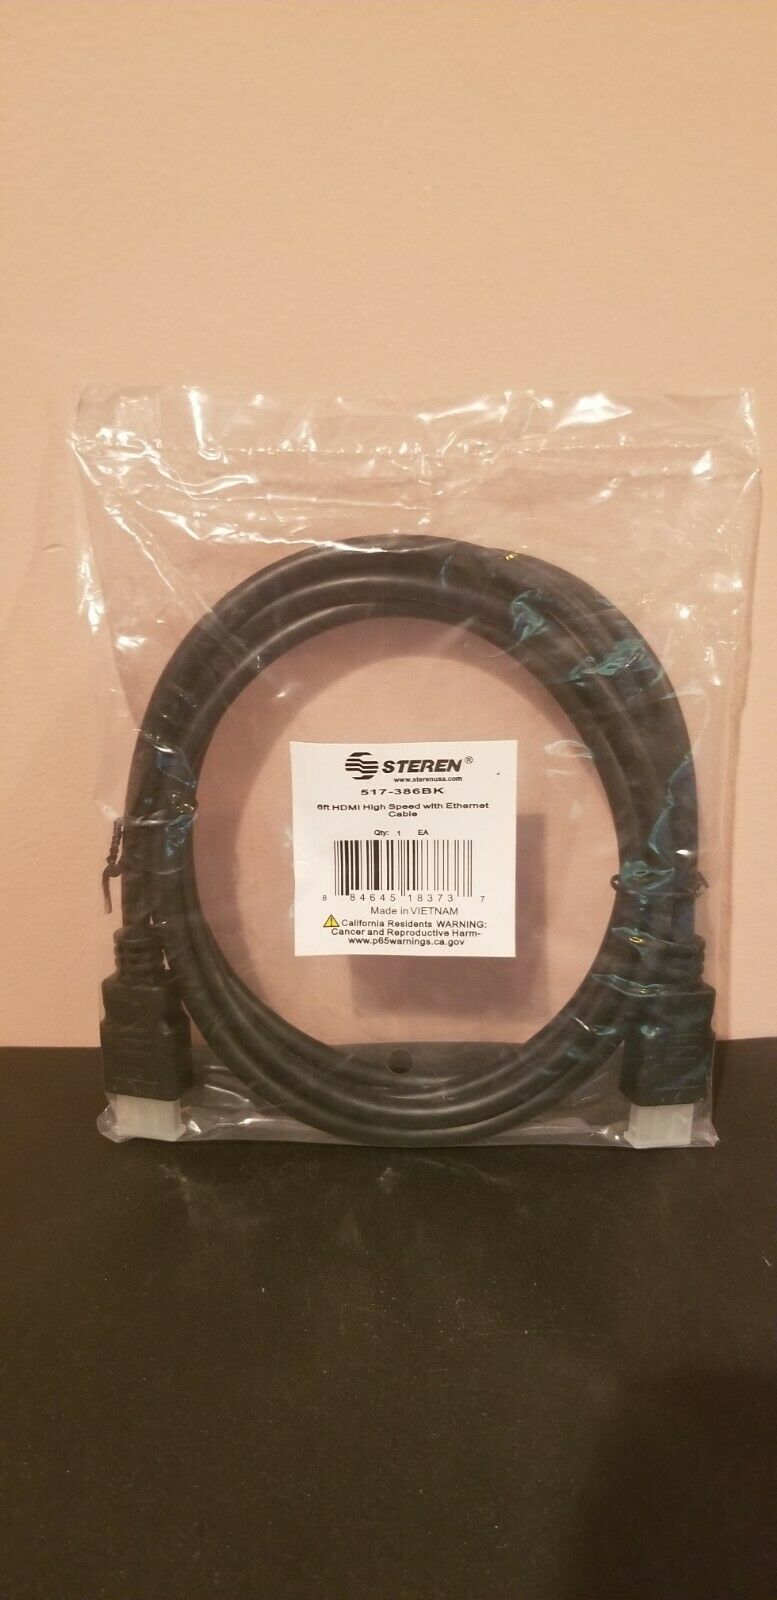 Steren 517-386BK 6' HDMI High Speed with Ethernet Cable - $7.87